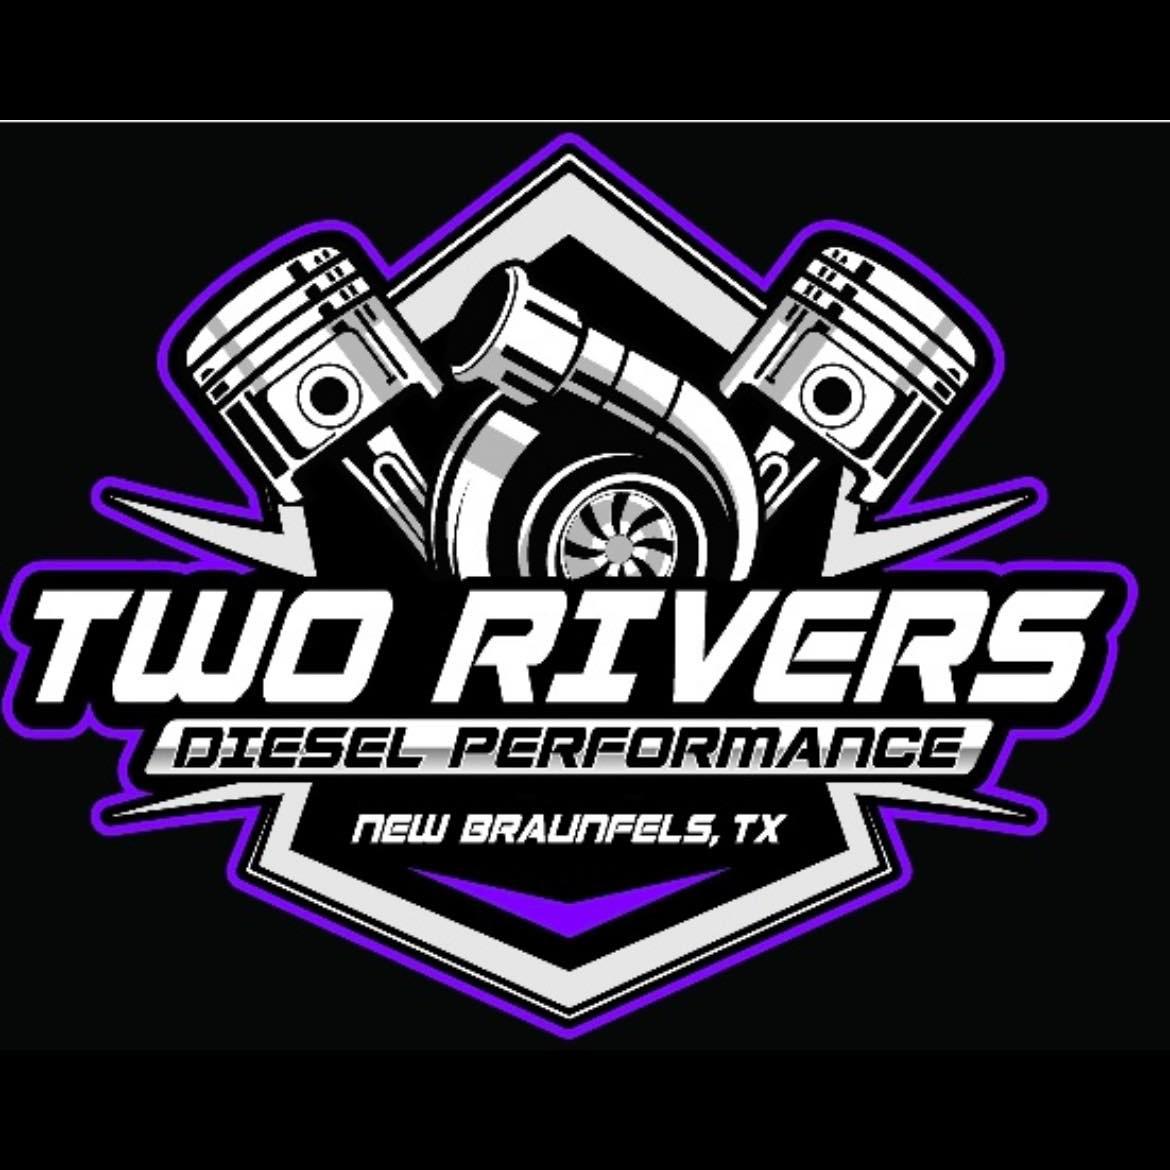 Two Rivers Diesel Performance - New Braunfels, TX 78130 - (254)434-7402 | ShowMeLocal.com